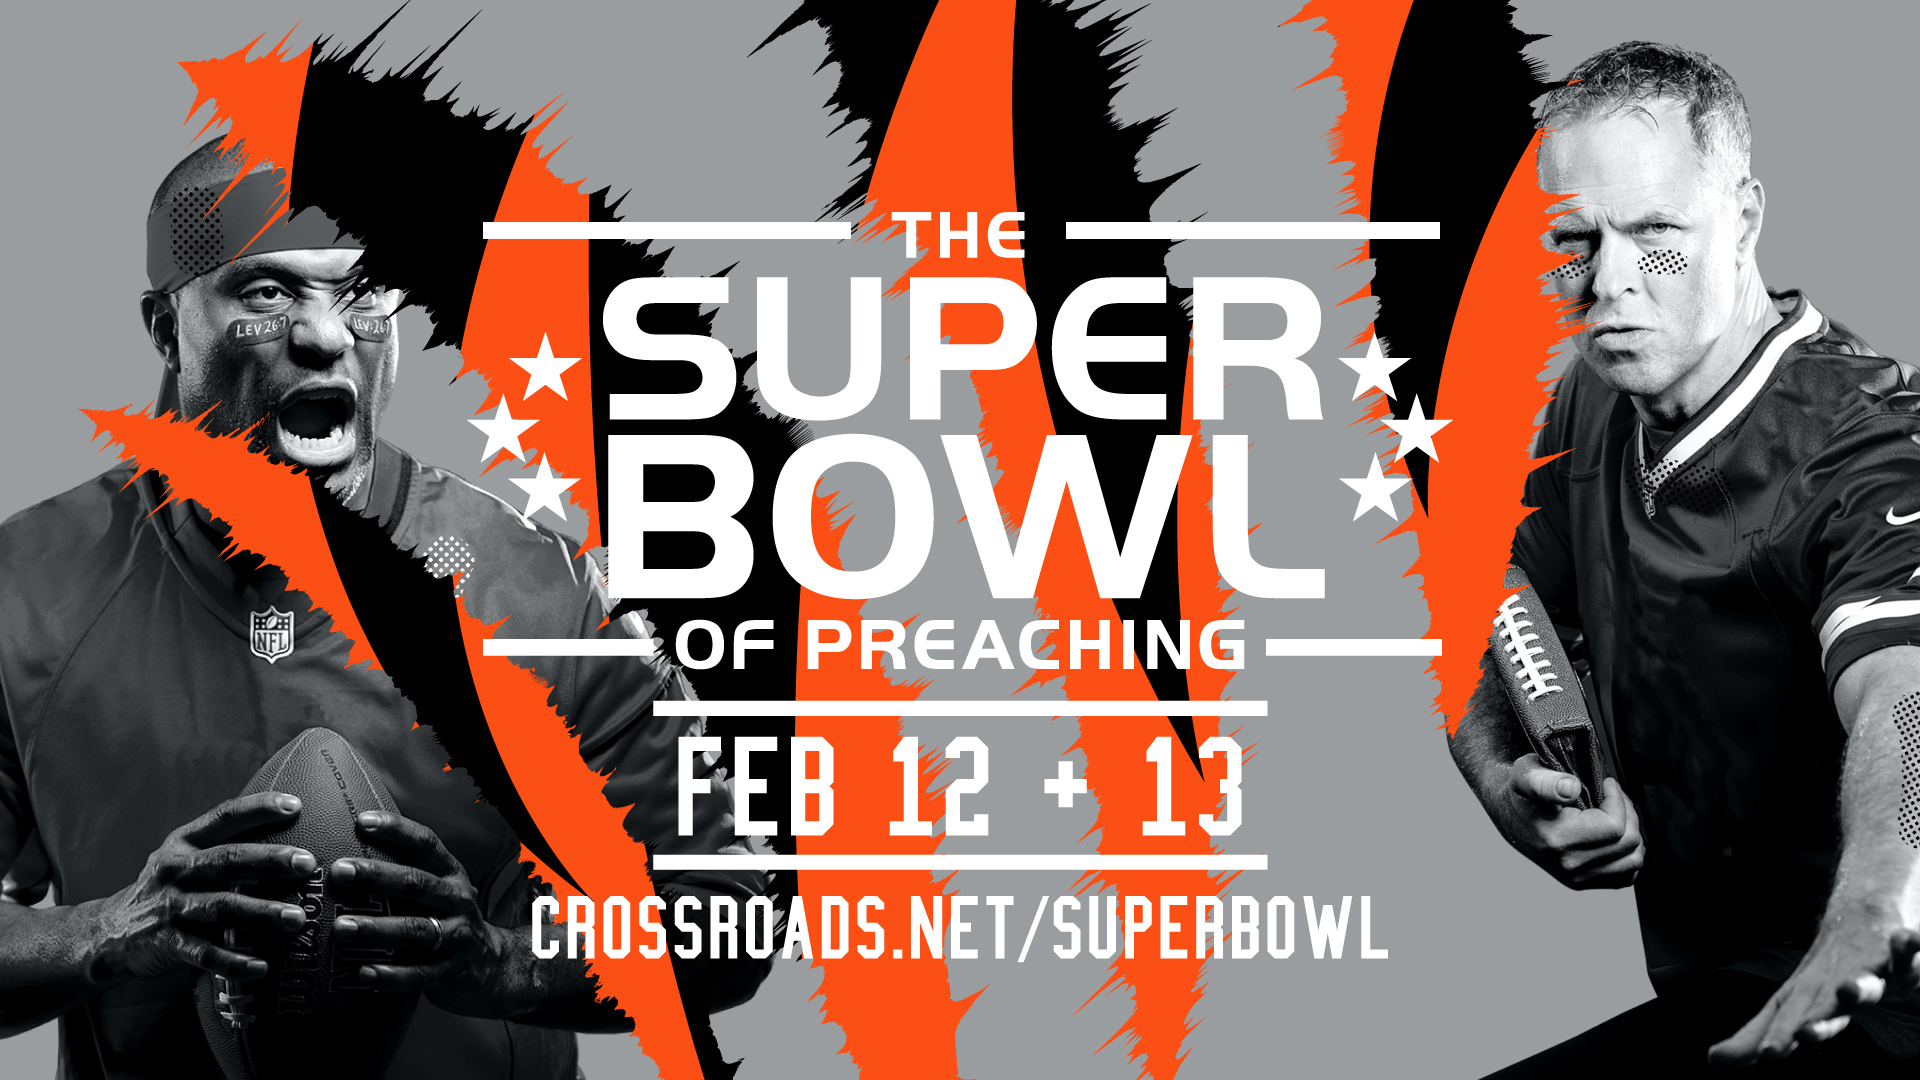 20 years of Crossroads Church 'Super Bowl of Preaching' ABC 36 News